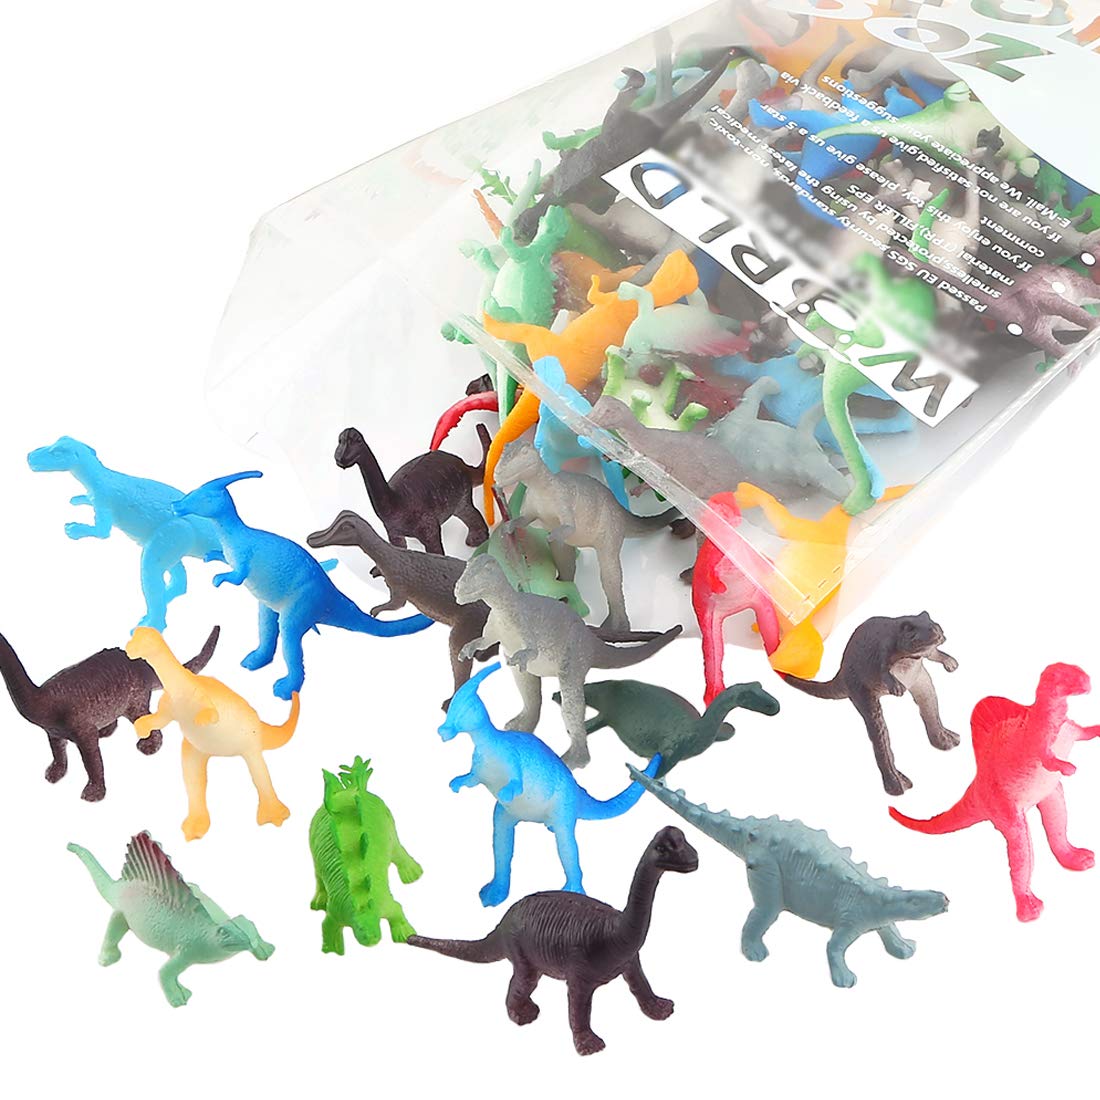 82 Piece Mini Dinosaur Toy Set for Dino Party Favor Supplies Birthday Cupcake Toppers - Assorted Vinyl Plastic Figure Toys for Kids Toddler Pinata Filler School Carnival Prize Bulk Goodie Bag Stuffers